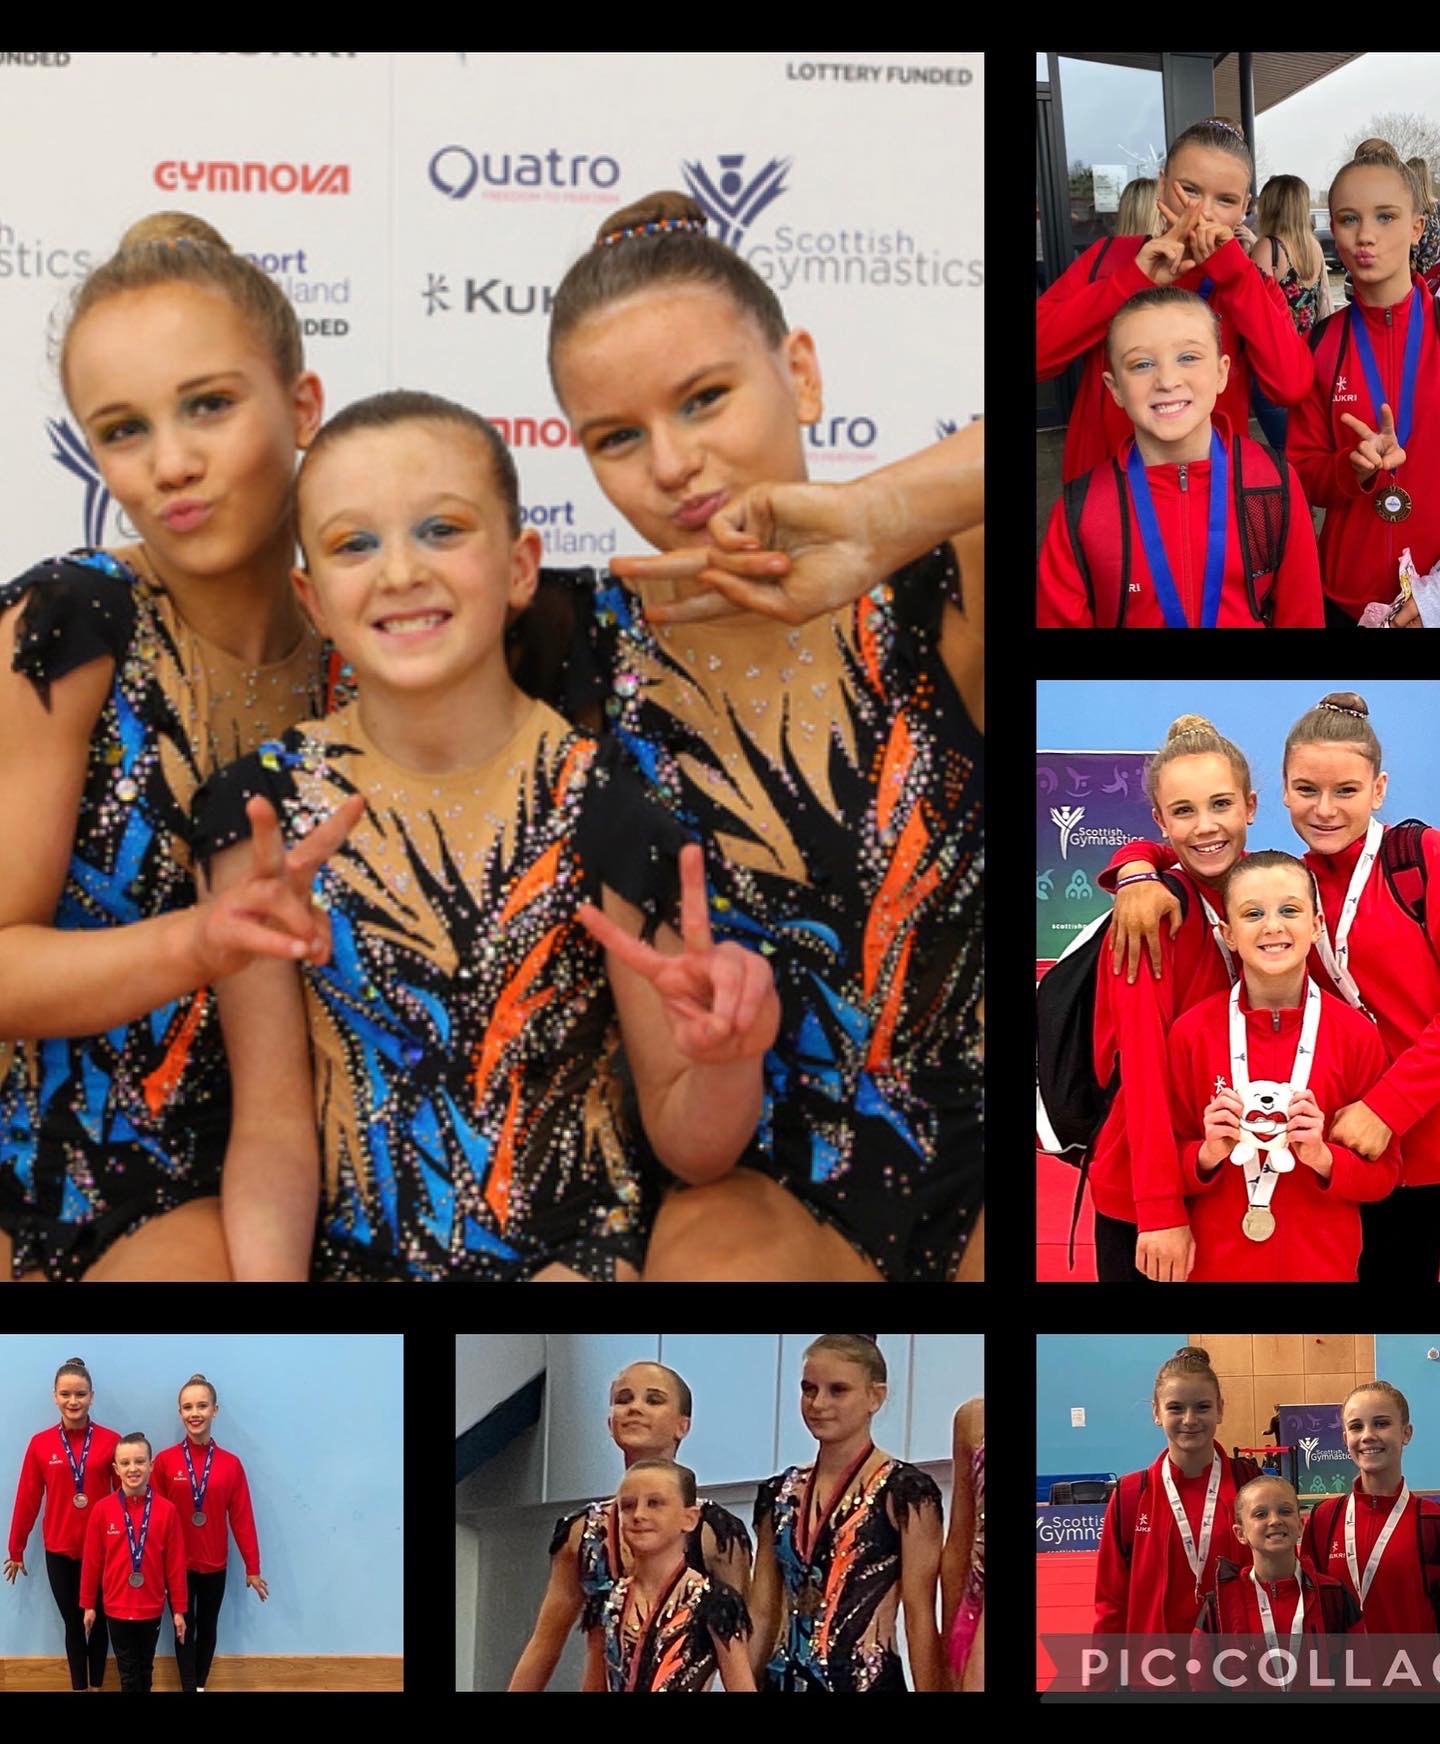 Photo colleage of Freya and friends in gymnasts' leotards